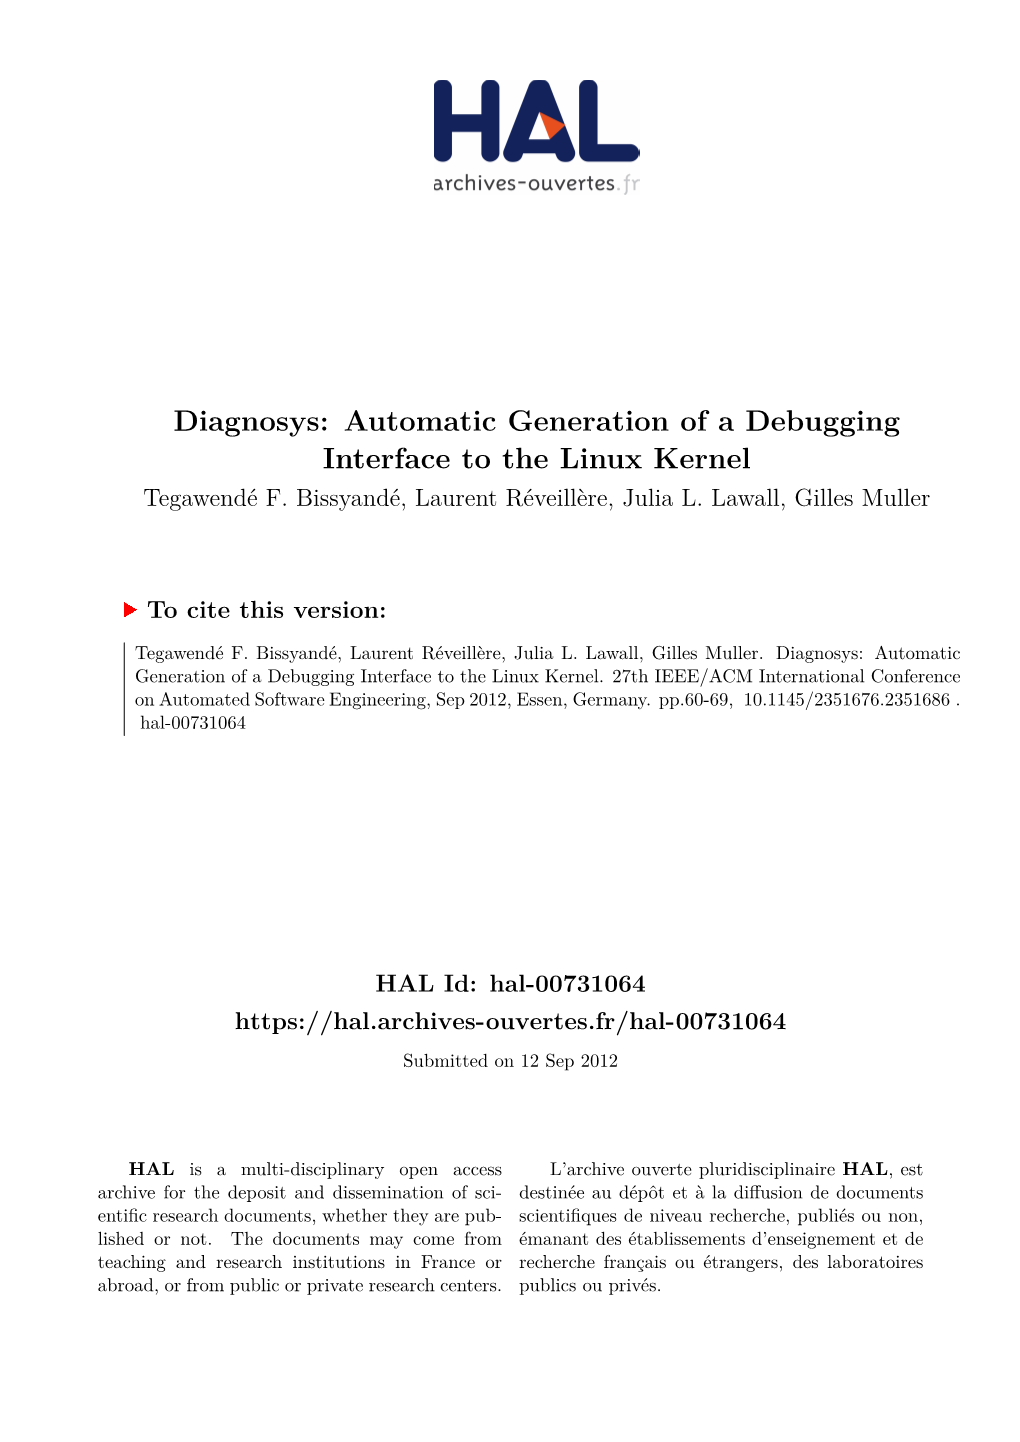 Diagnosys: Automatic Generation of a Debugging Interface to the Linux Kernel Tegawendé F